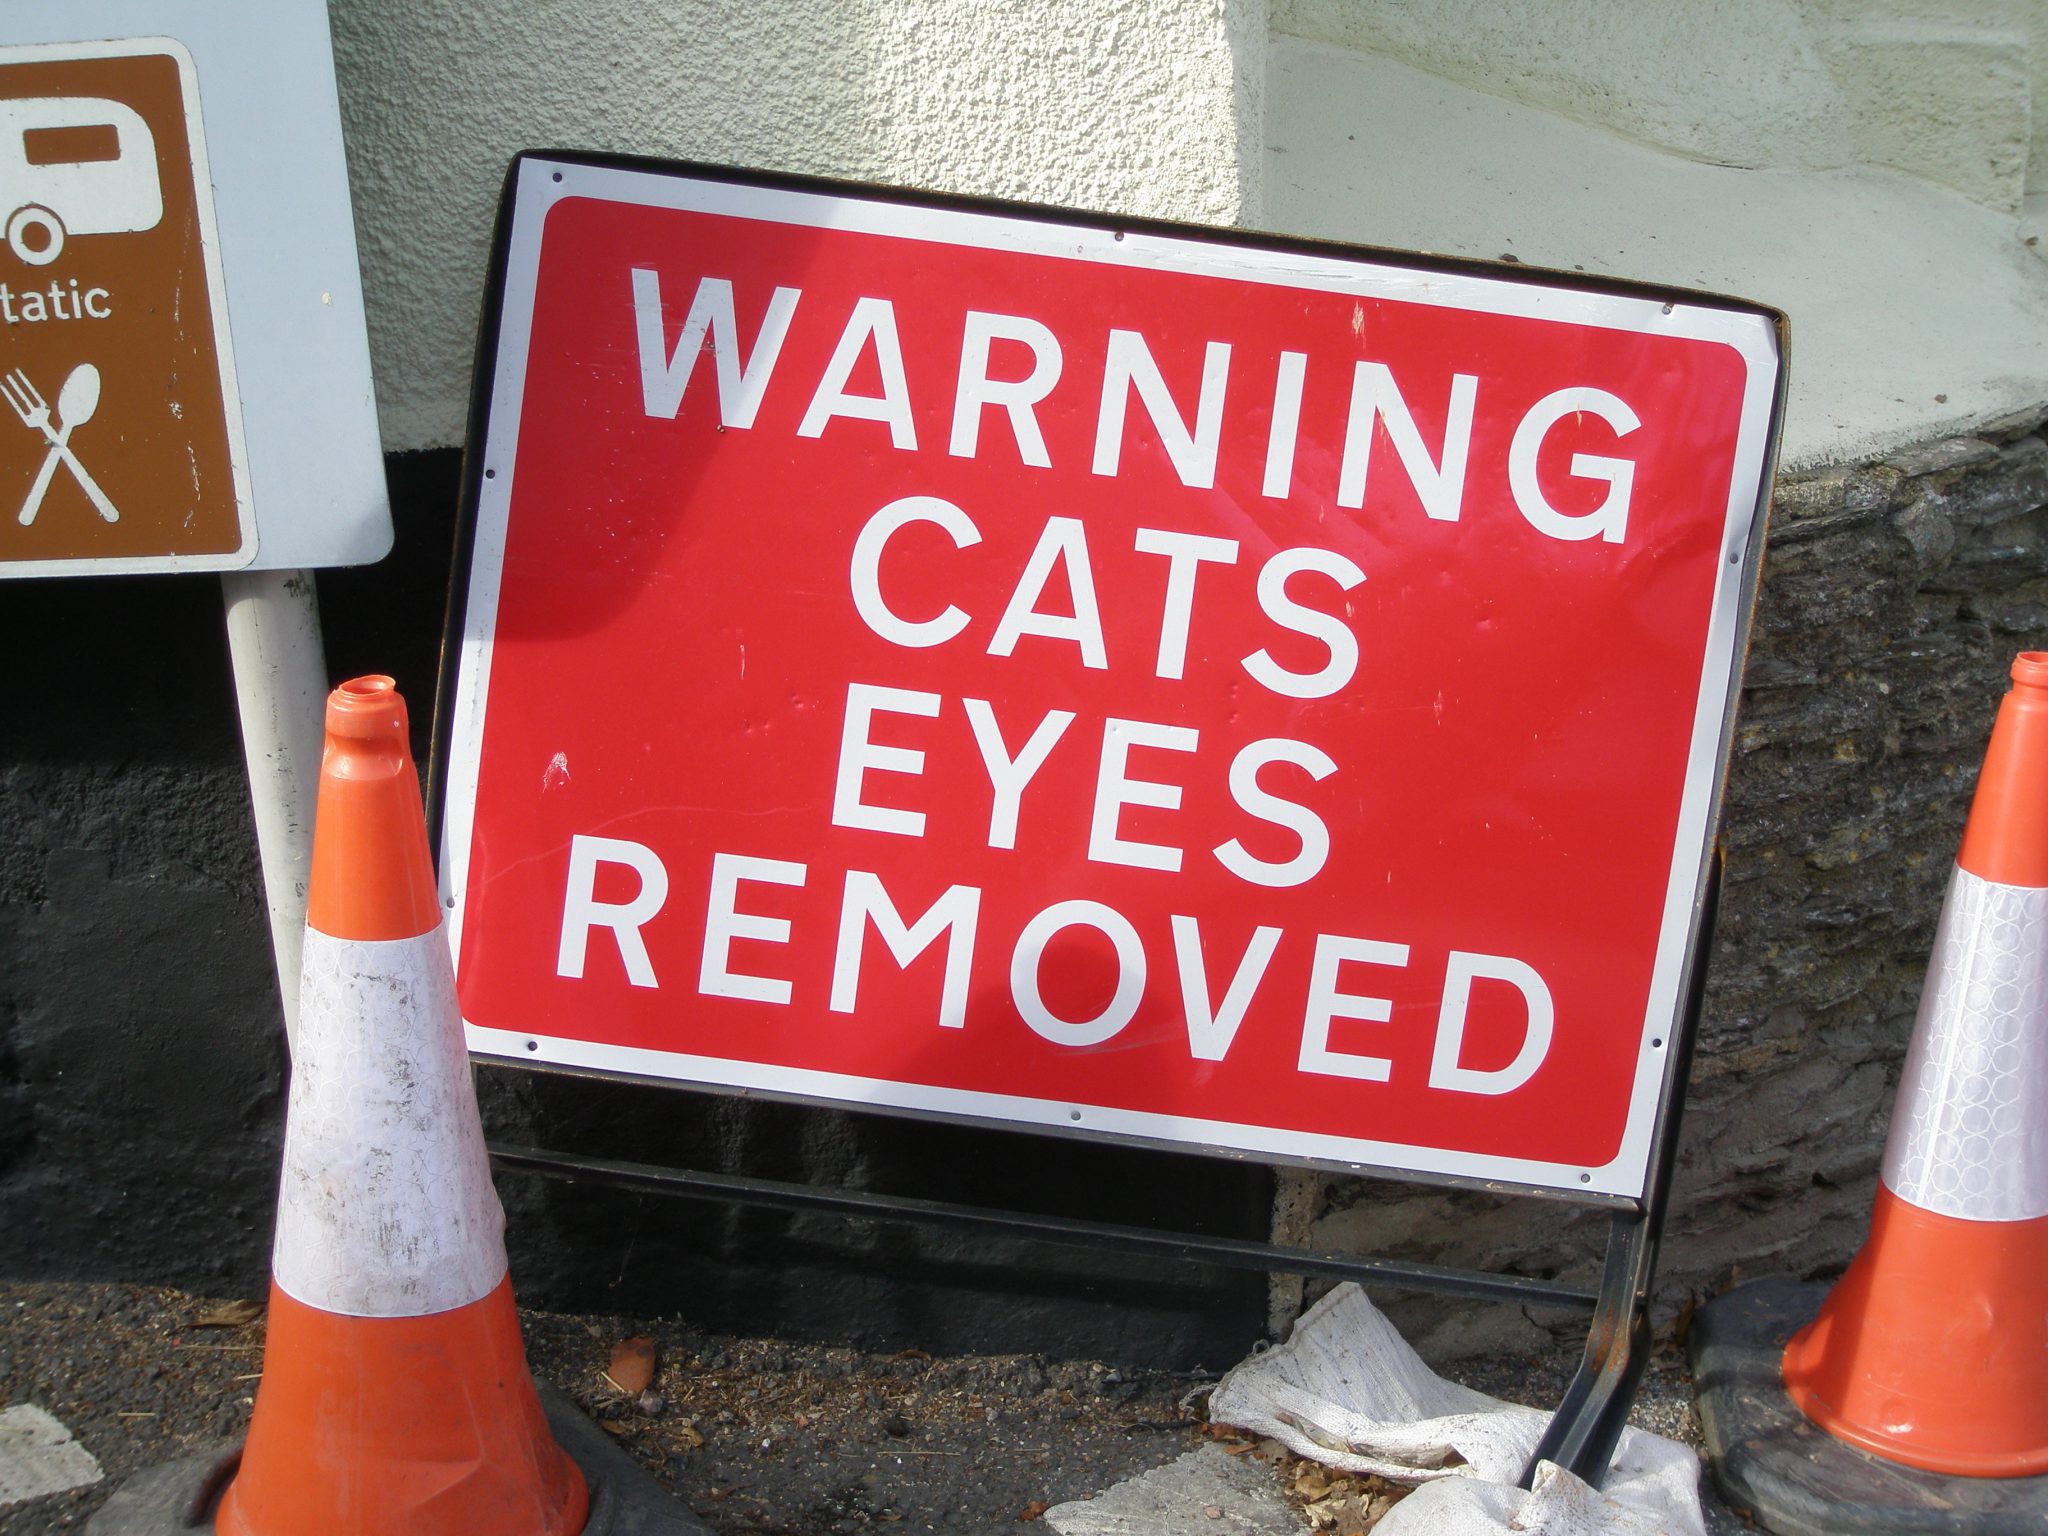  I hopped out of the car and took this picture, just to prove that the removal of man-made Cat’s Eyes is a routine event, in the United Kingdom! 